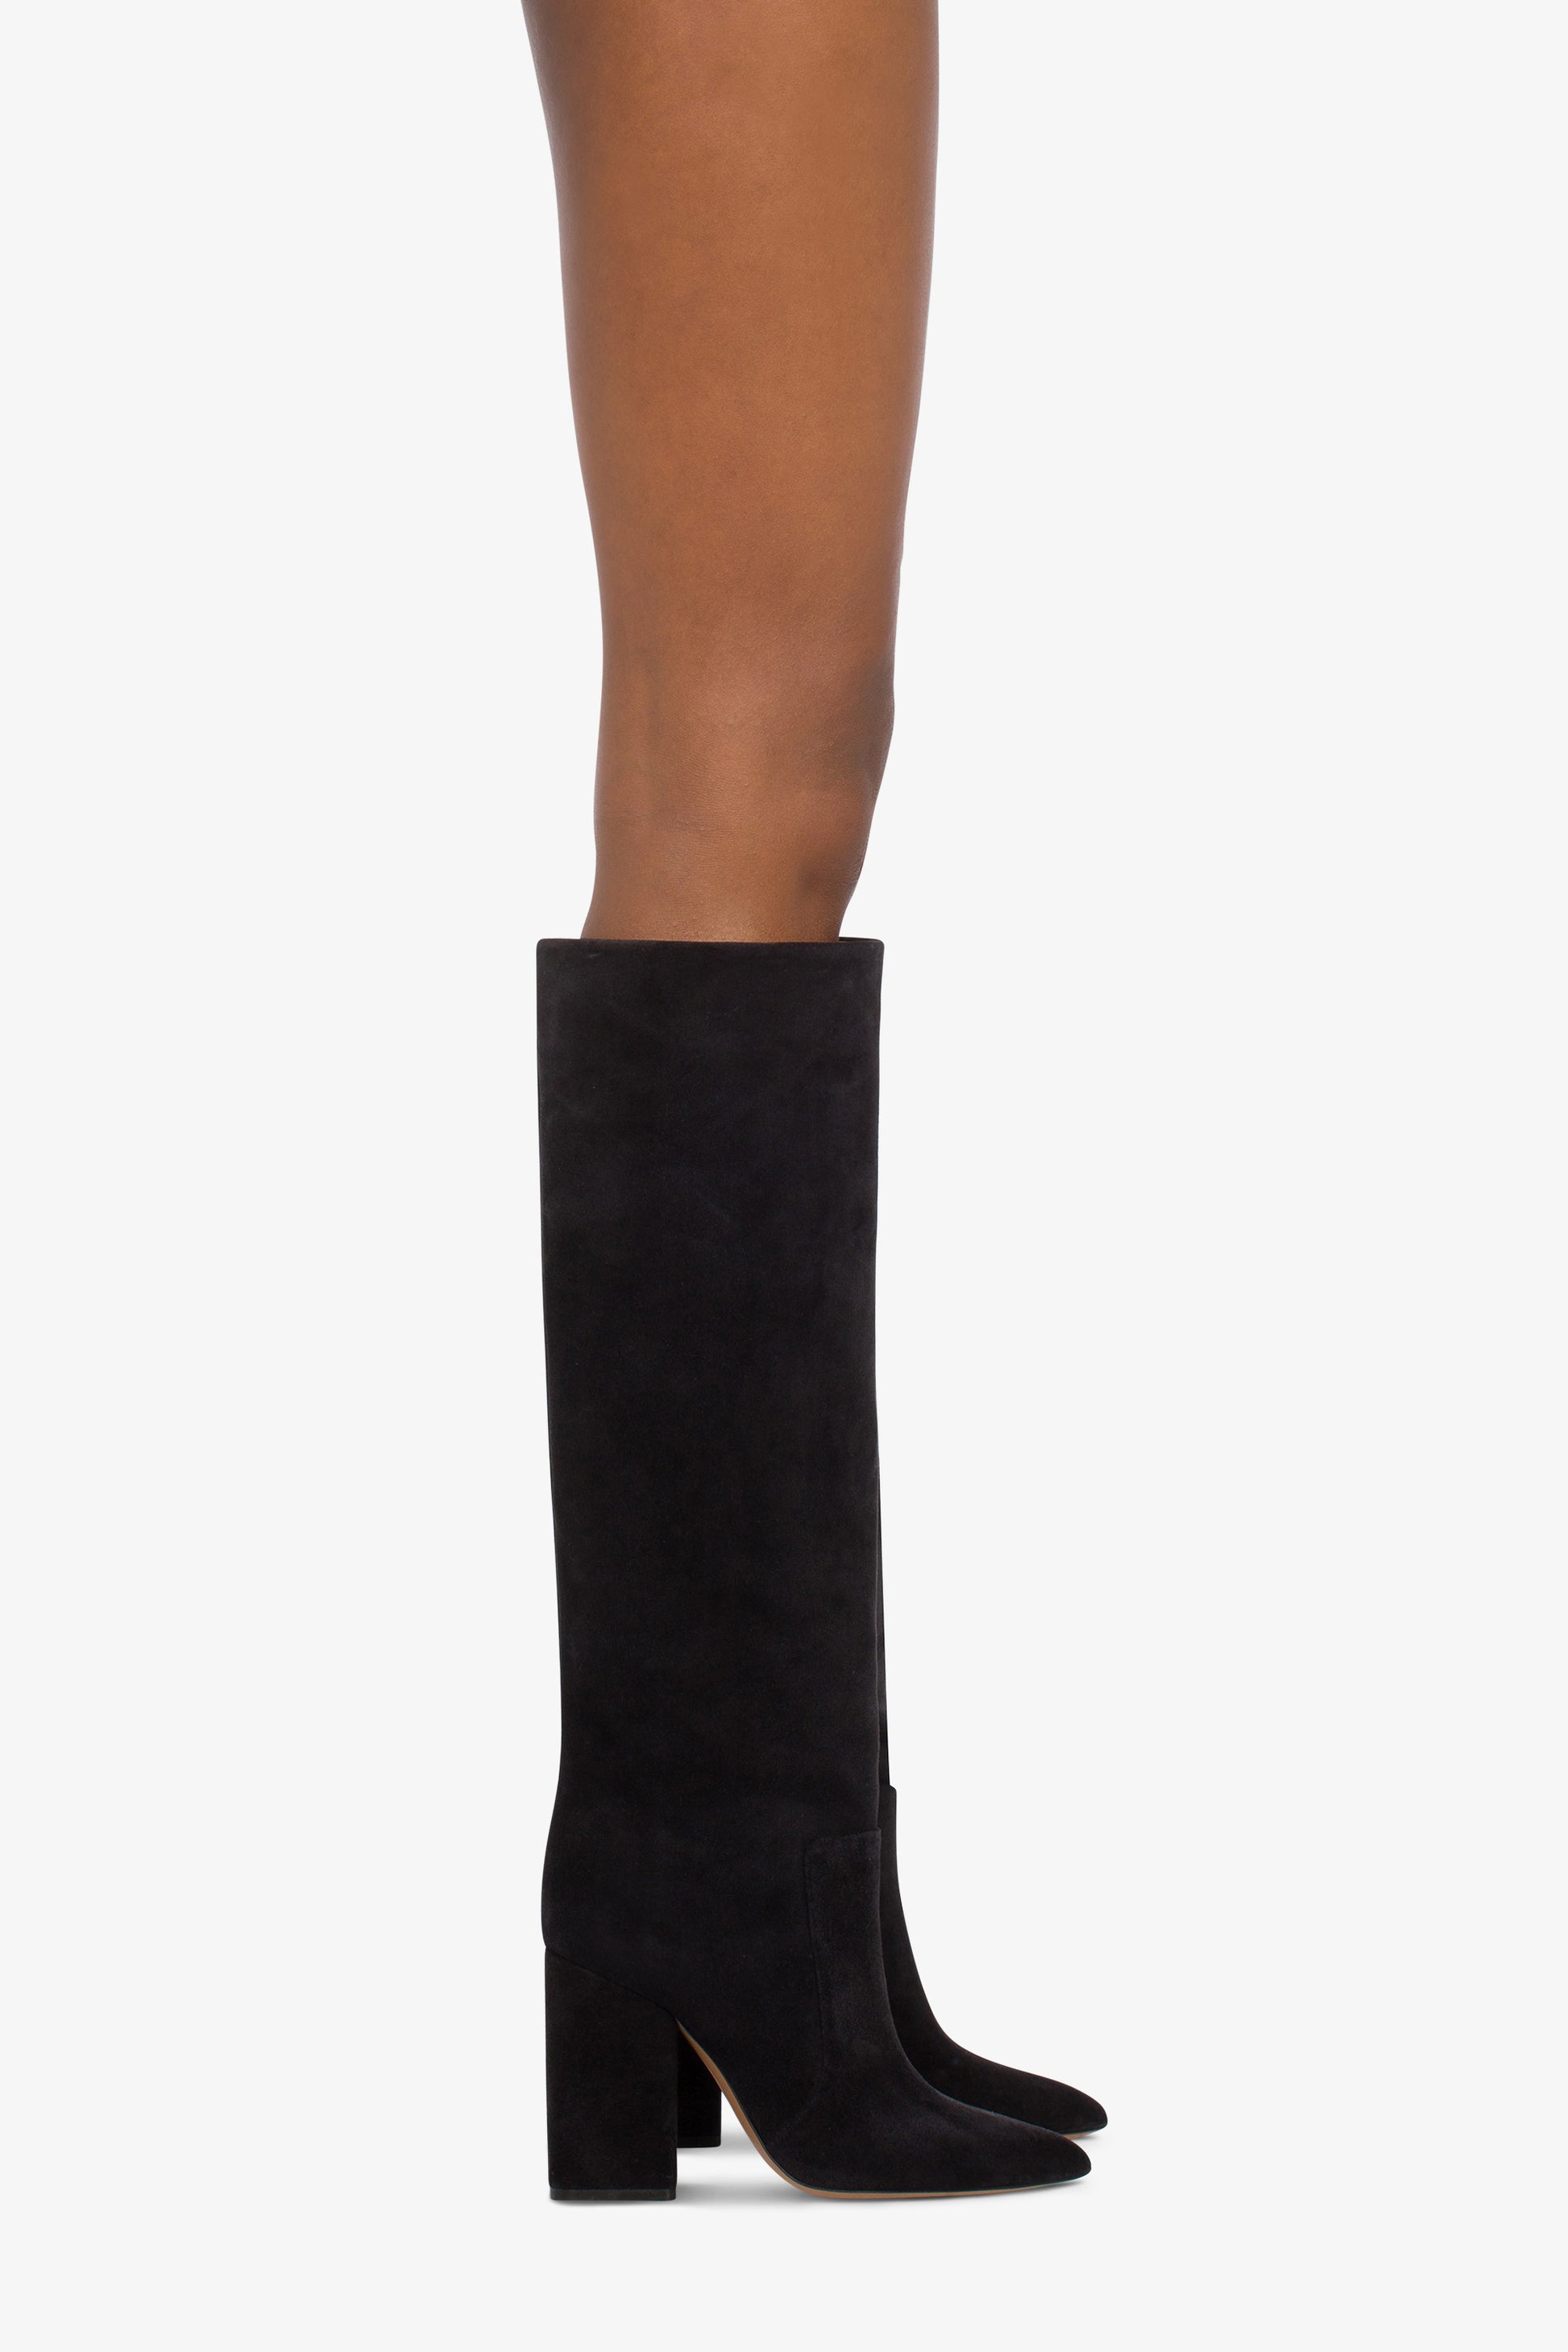 Knee-high boots in soft off-black suede leather - Indossato